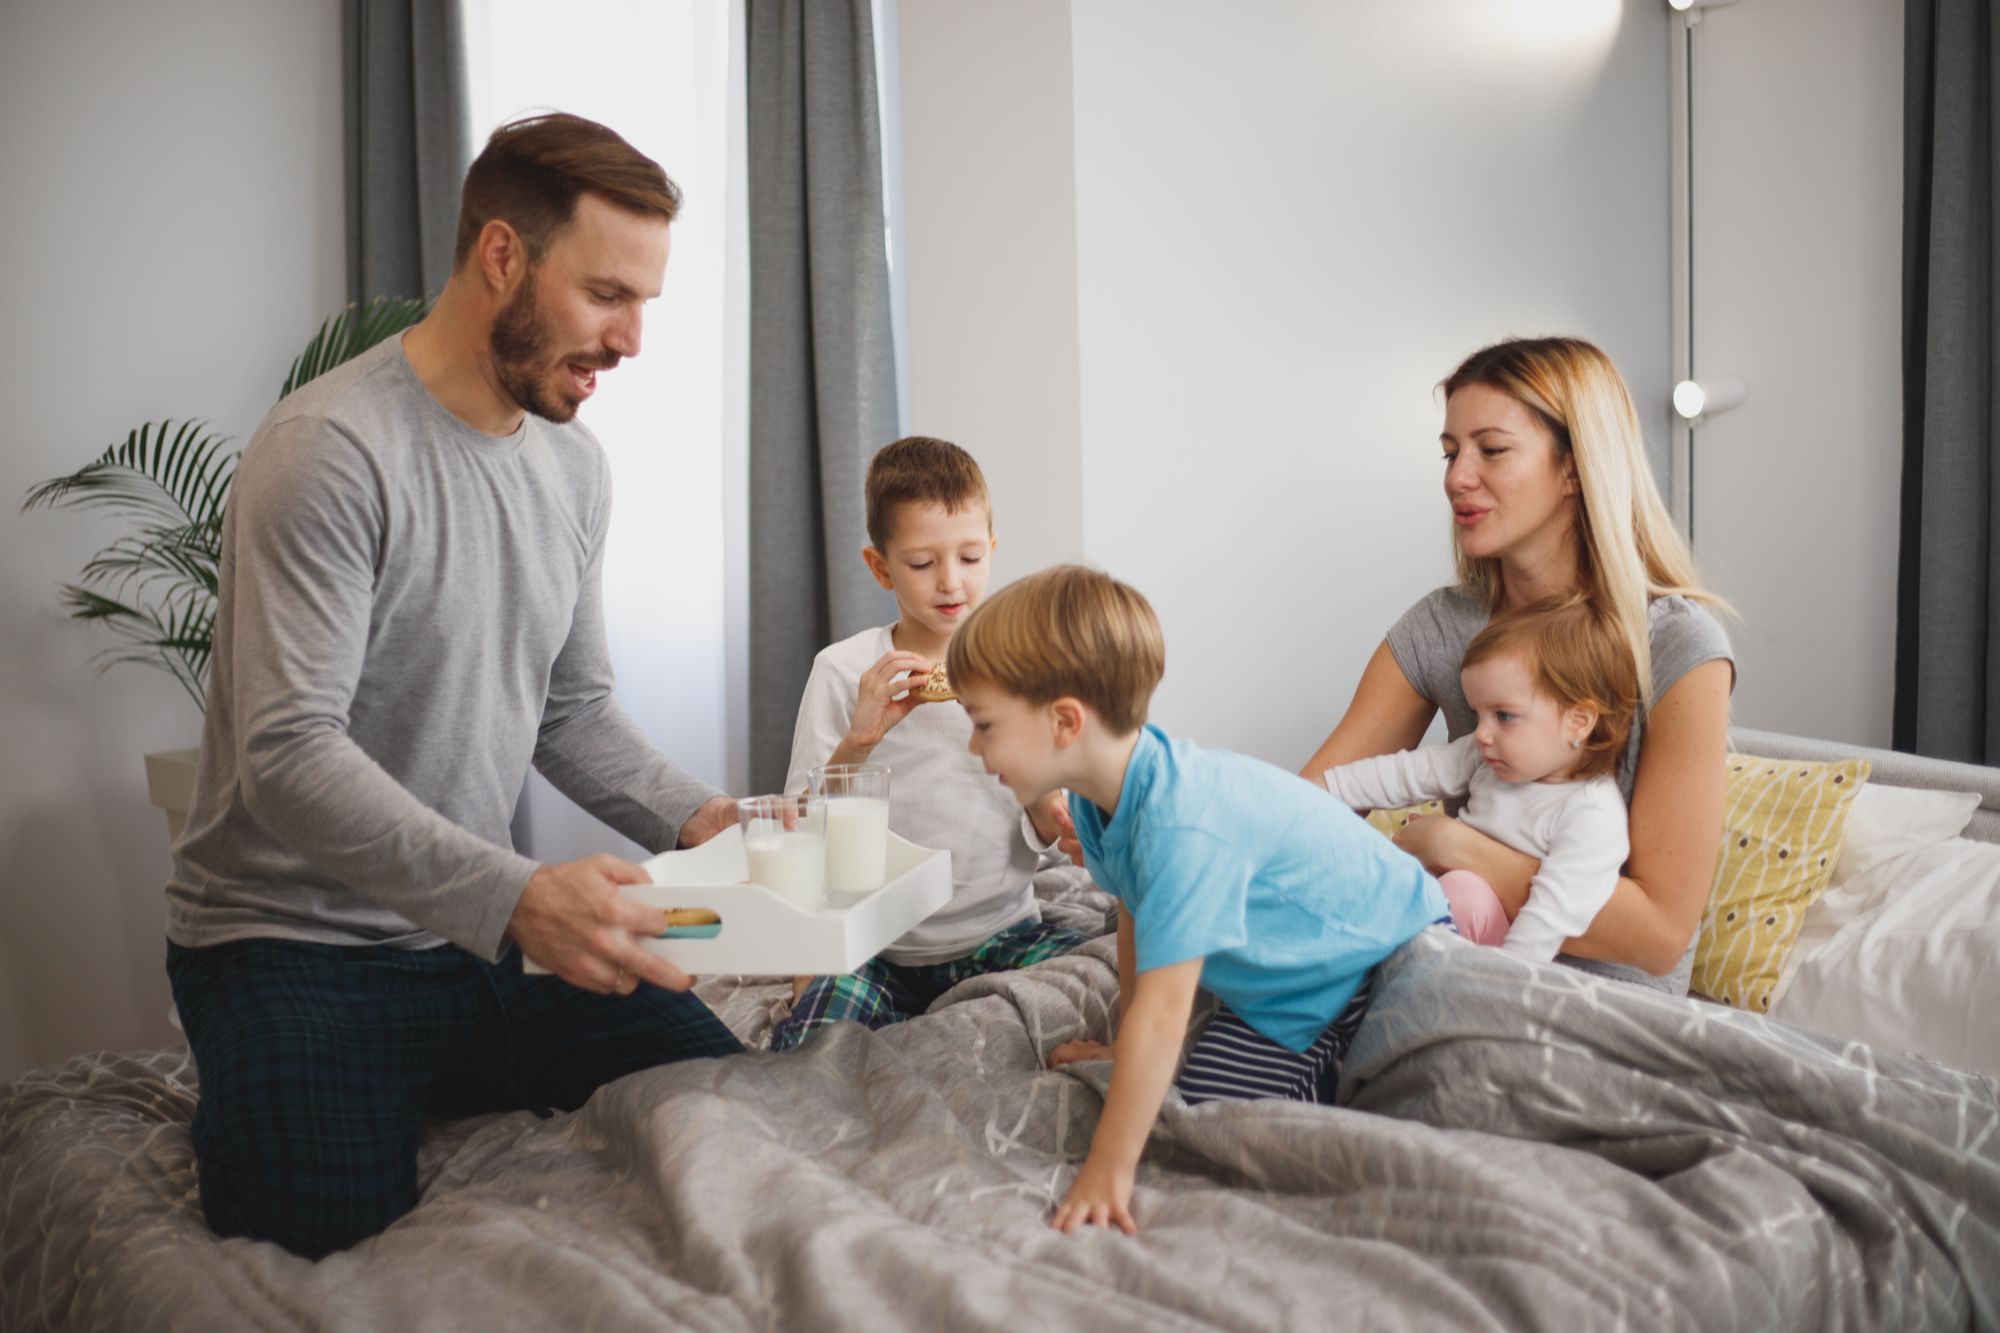 Family Breakfast Free Stock Image, breakfast in bed, family of five